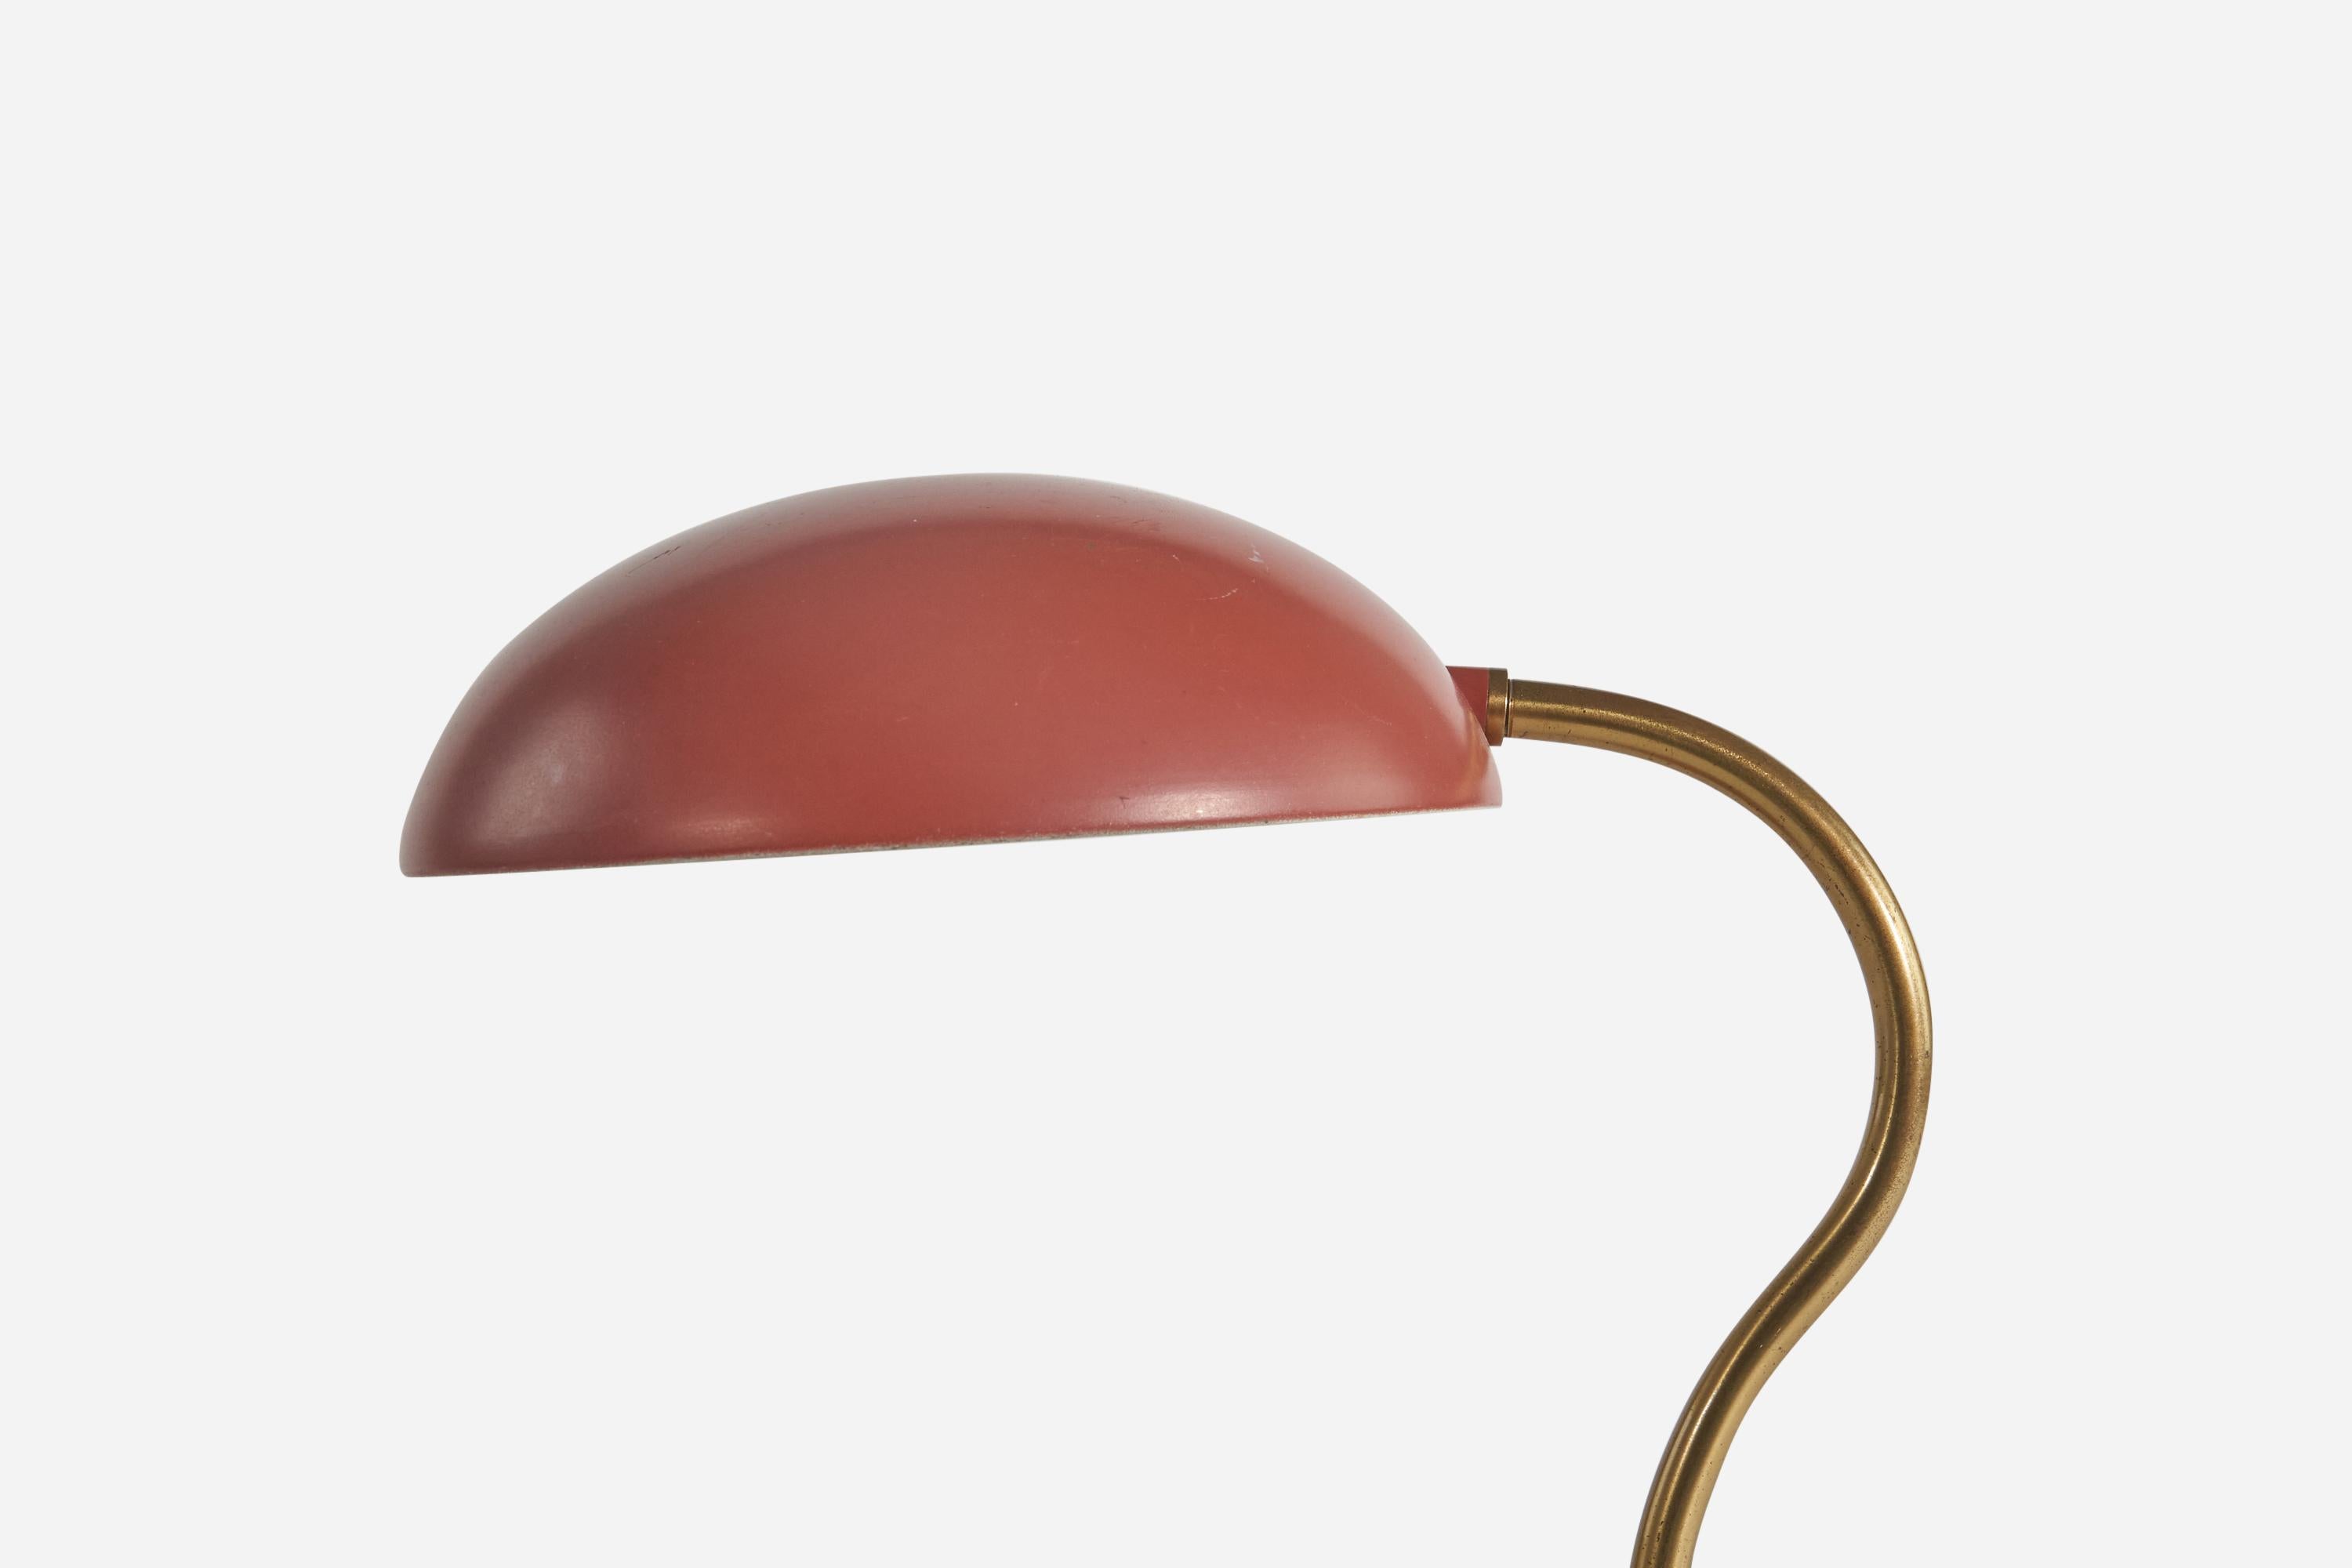 ASEA, Adjustable Table Lamp, Red-Lacquered Metal, Brass, Sweden, 1950s In Good Condition For Sale In High Point, NC